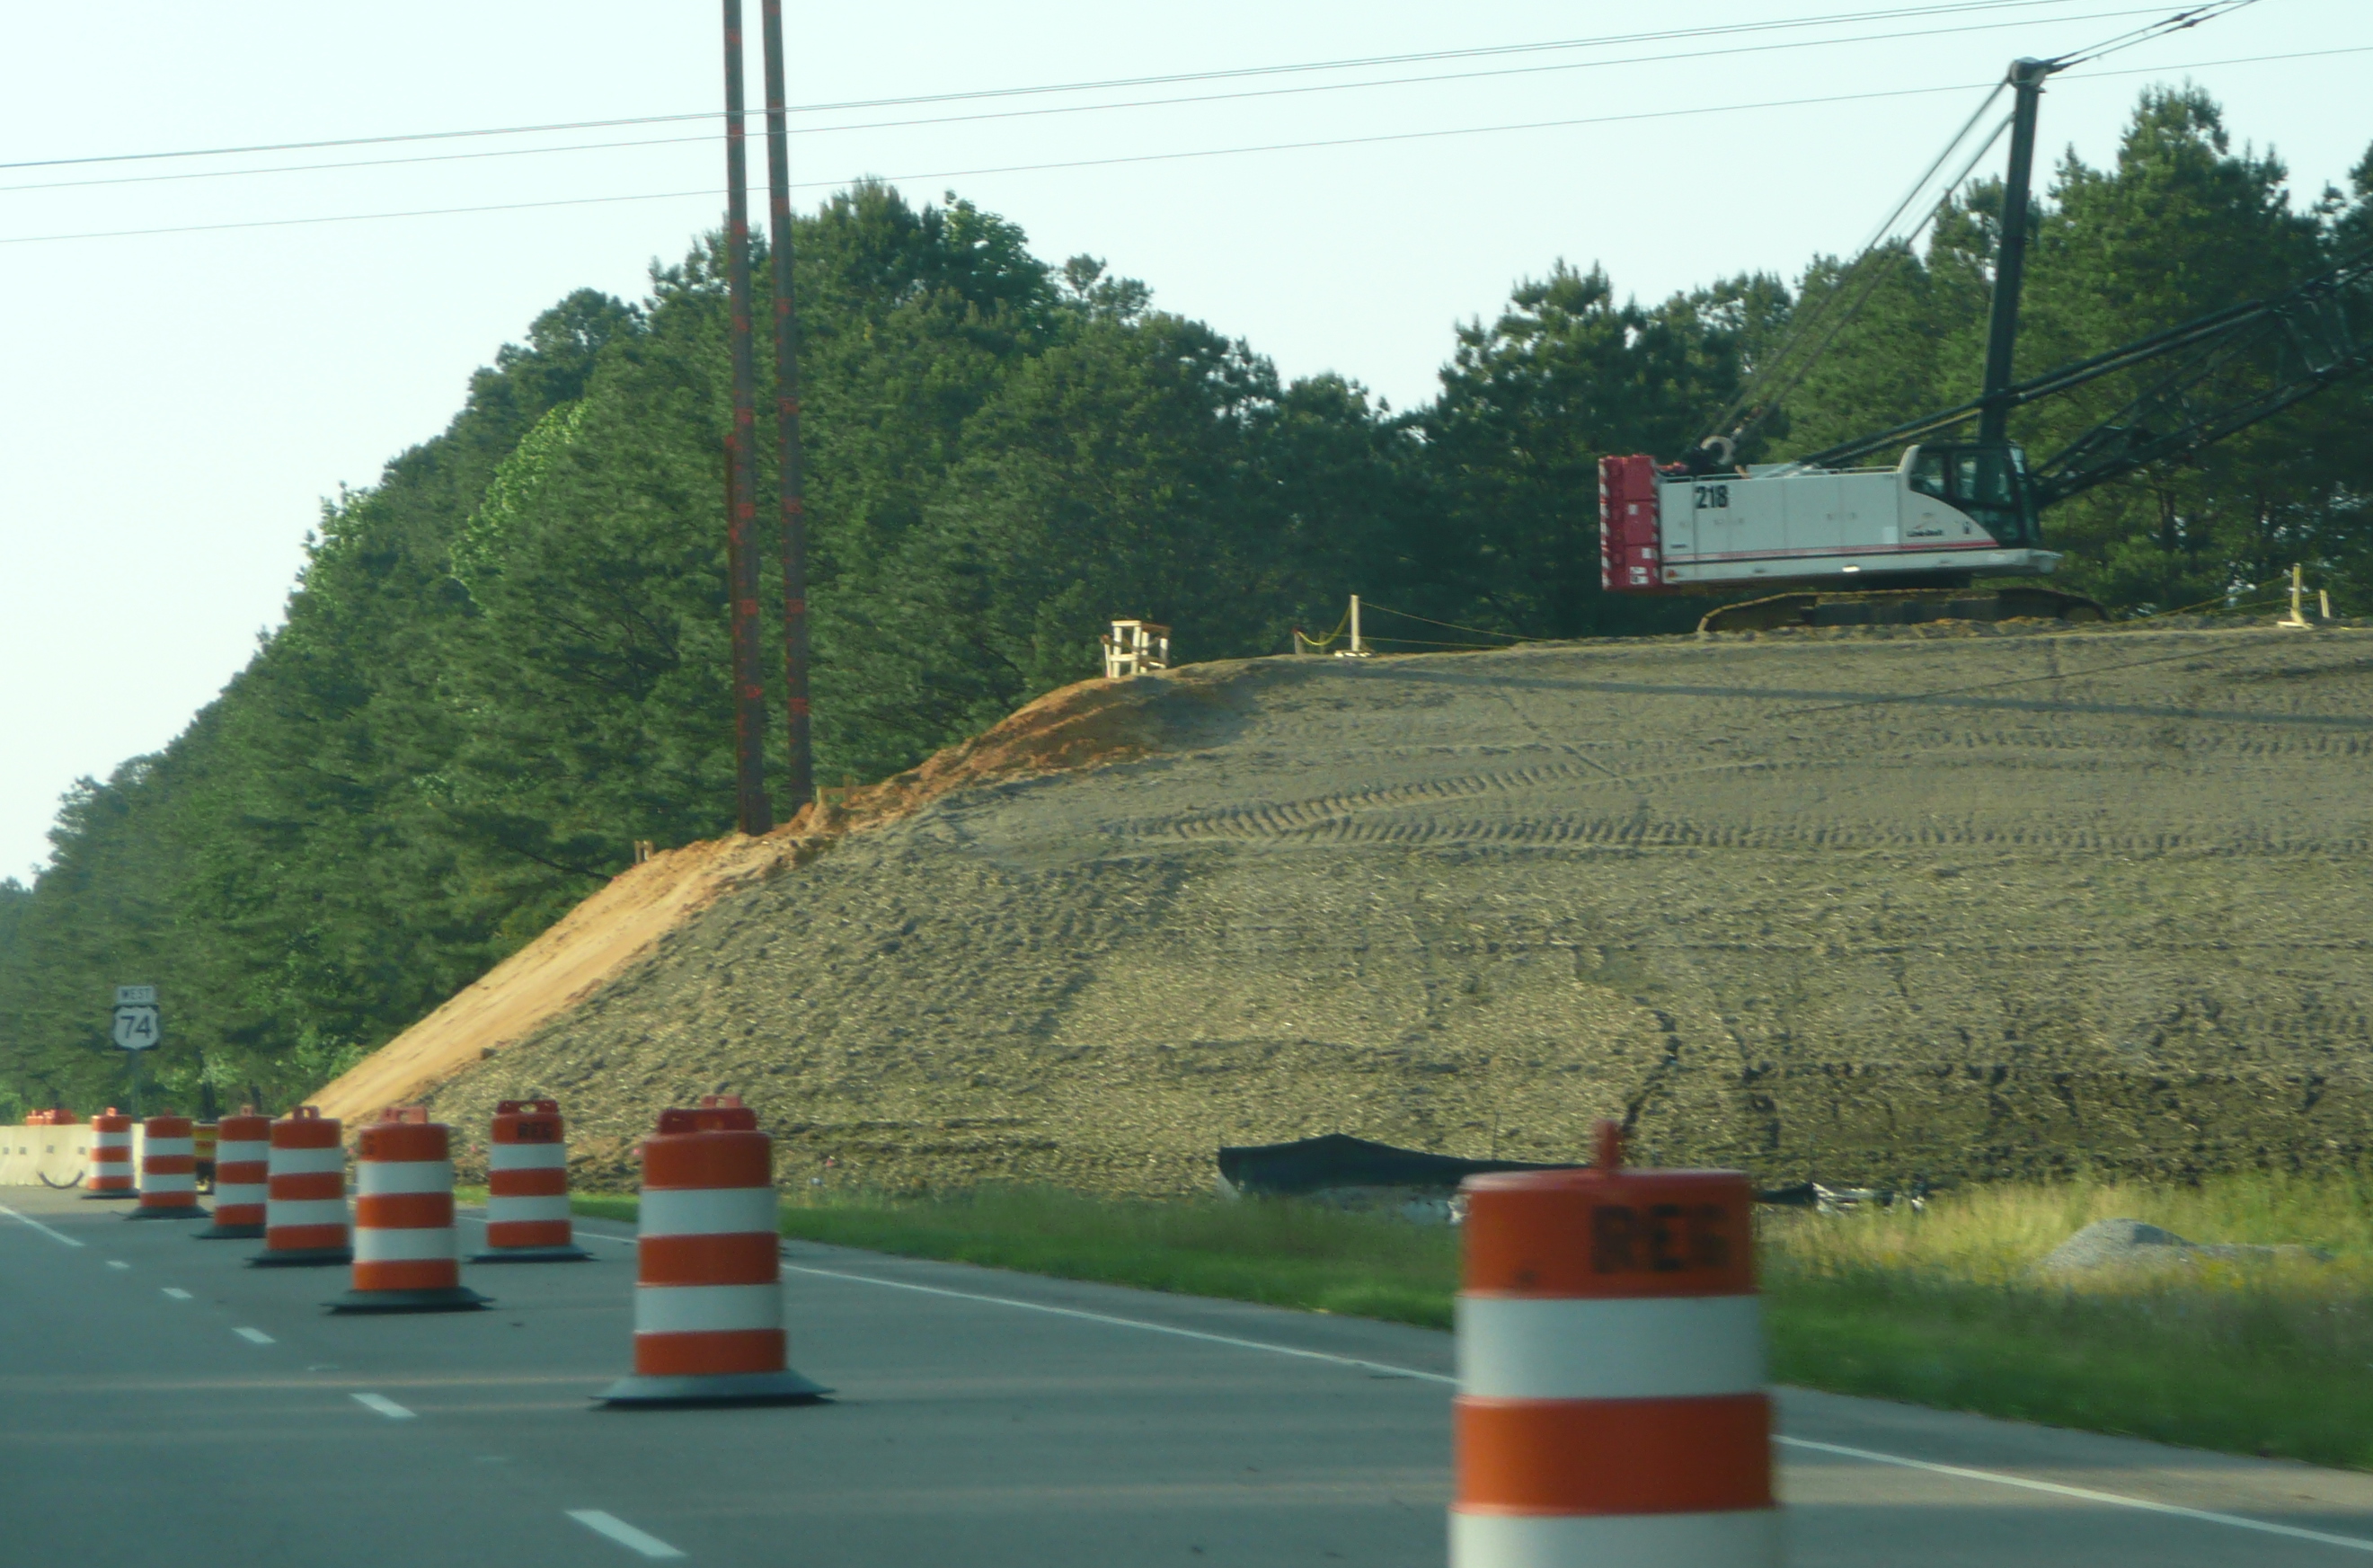 Photo of Kingsdale Rd Bridge from US 74 West in May 2009. Courtesy of 
James Mast